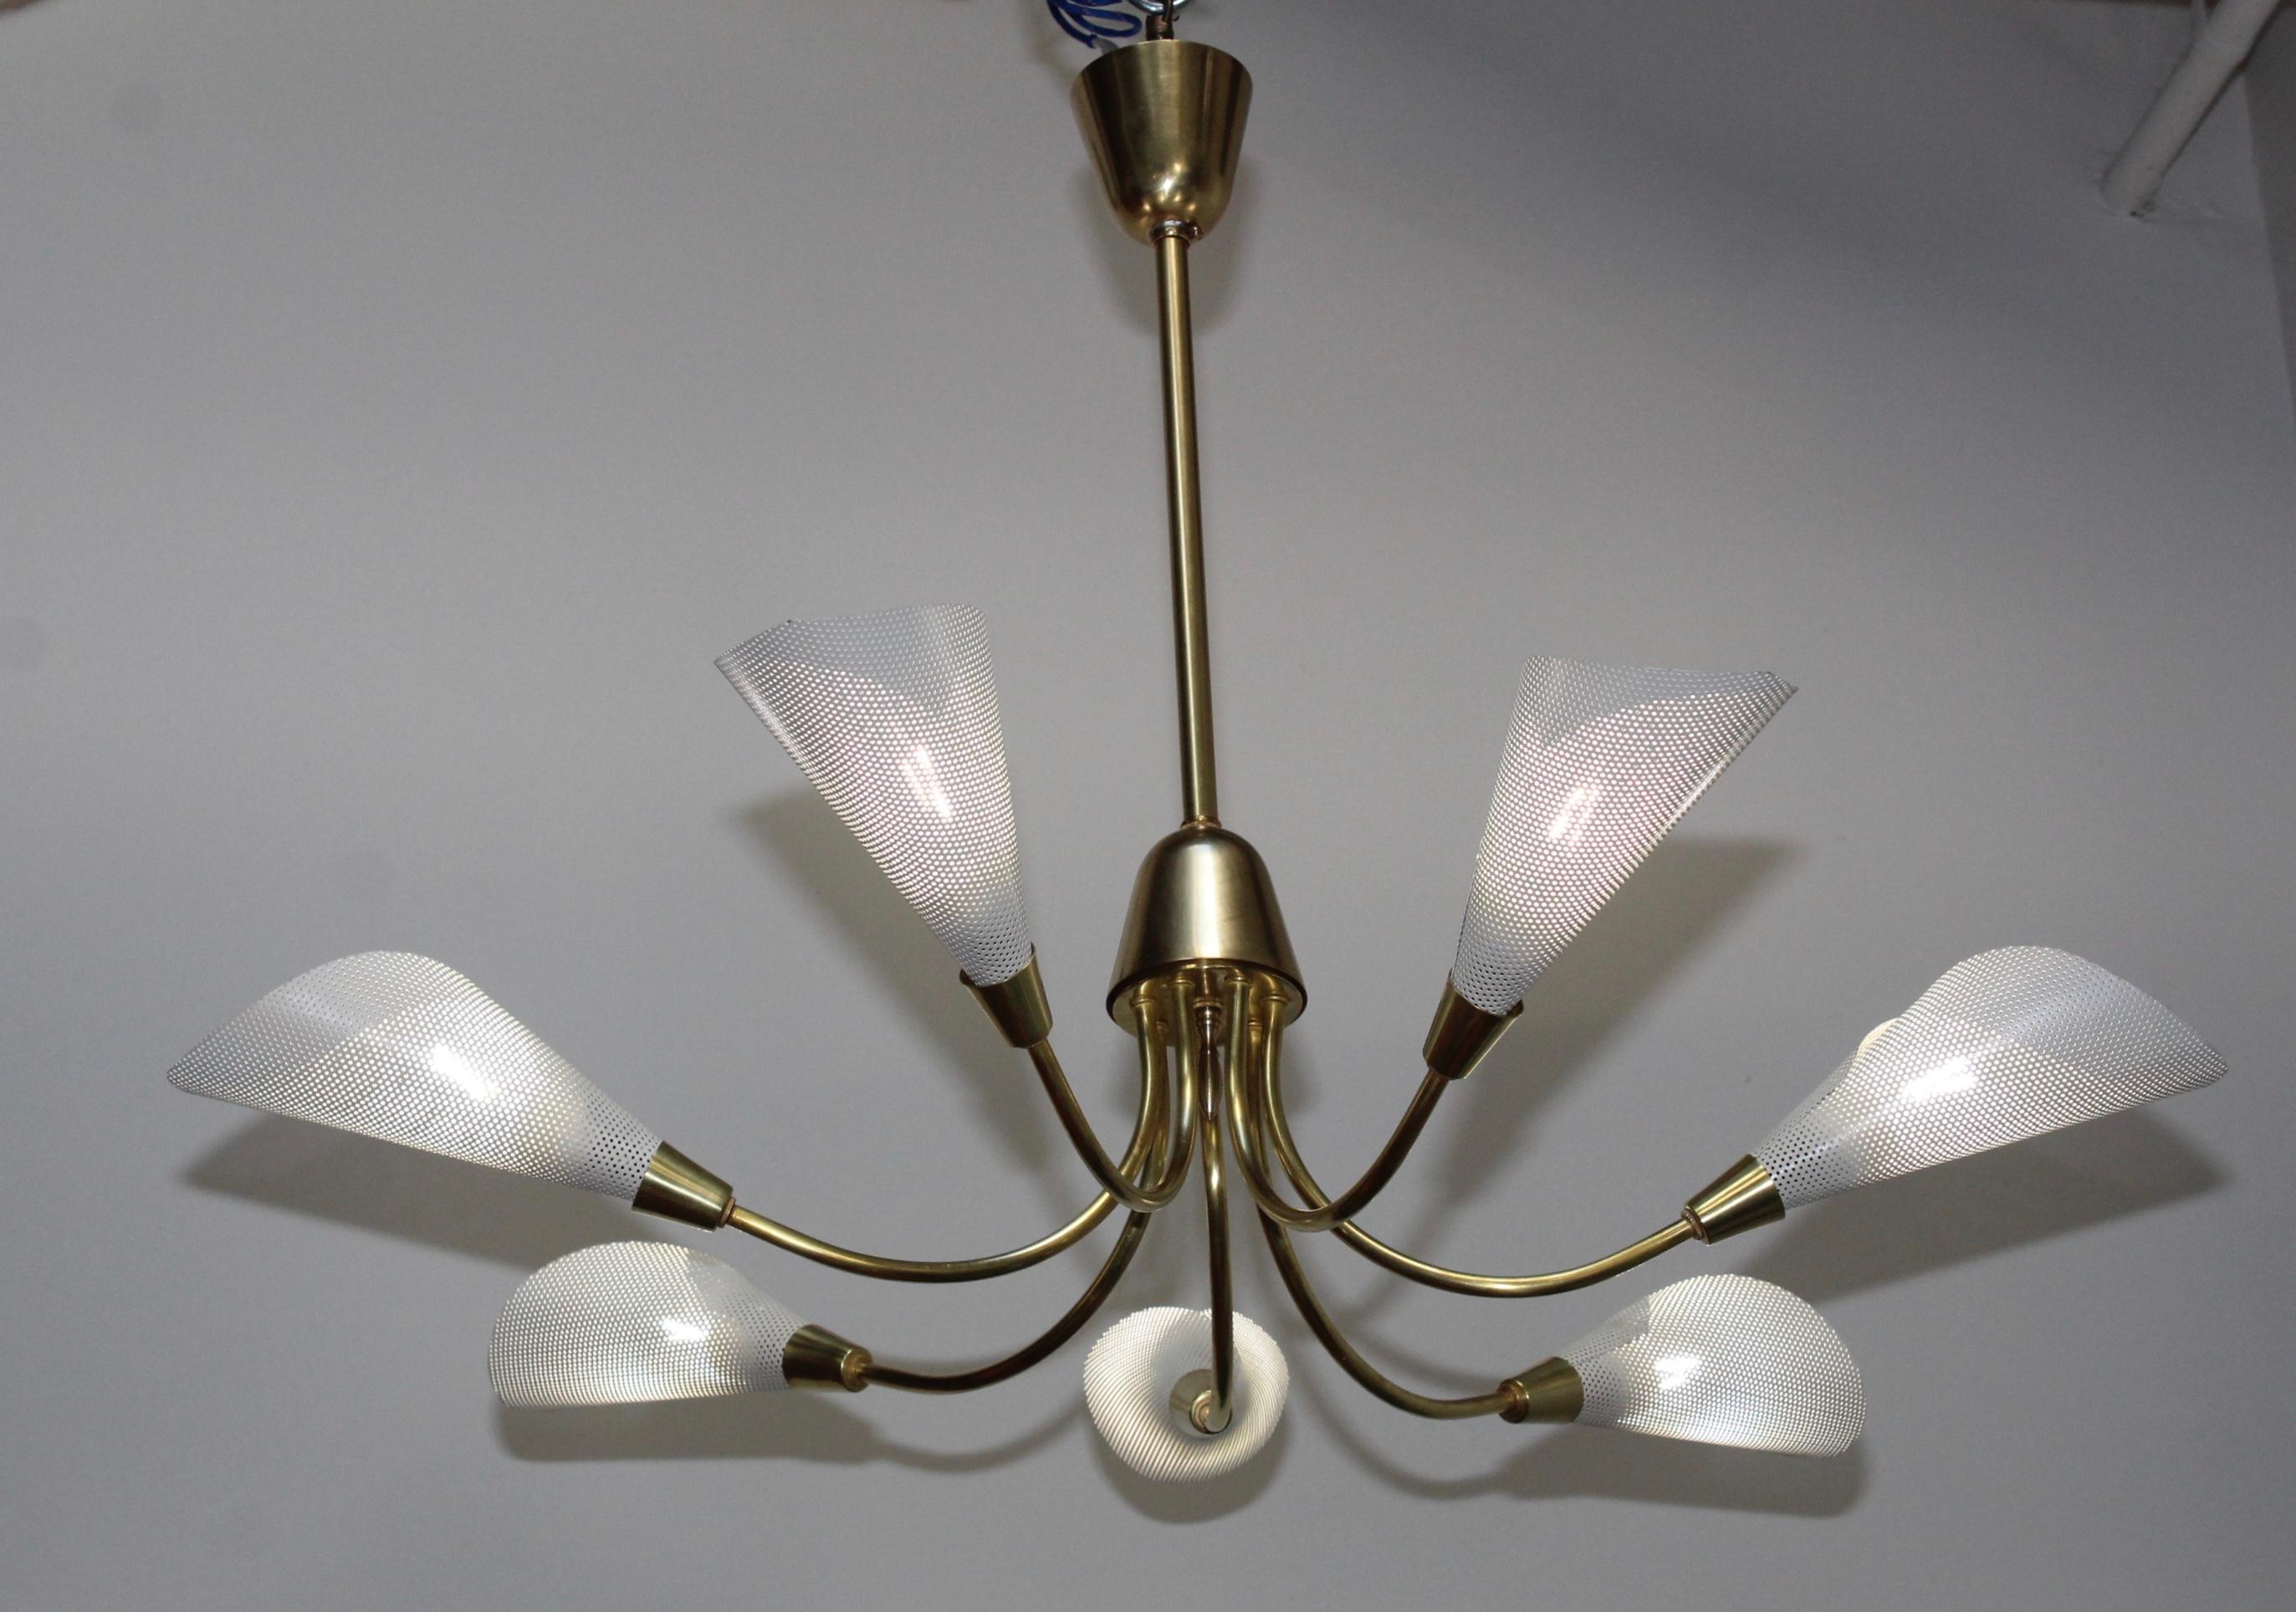 Stunning 1960s Mid-Century Modern large 7 arm French chandelier. Fully restored and rewired ready to use.